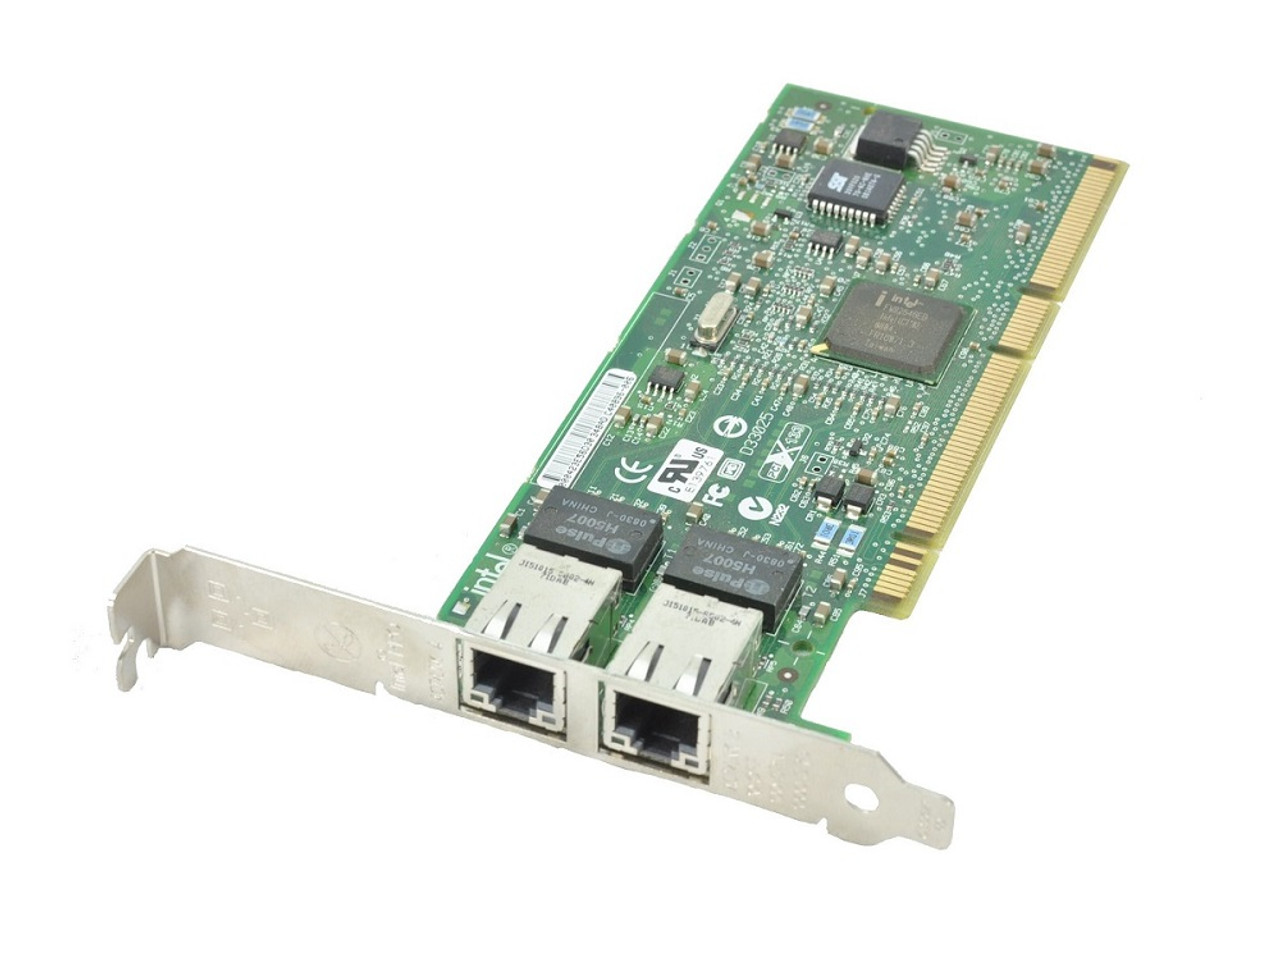 227251-001 - HP Remote Insight Lights-Out Edition II PCB PCI-Express 100Base-TX Remote Management Adapter ProLiant DL/ML Series NAS E7000 V2